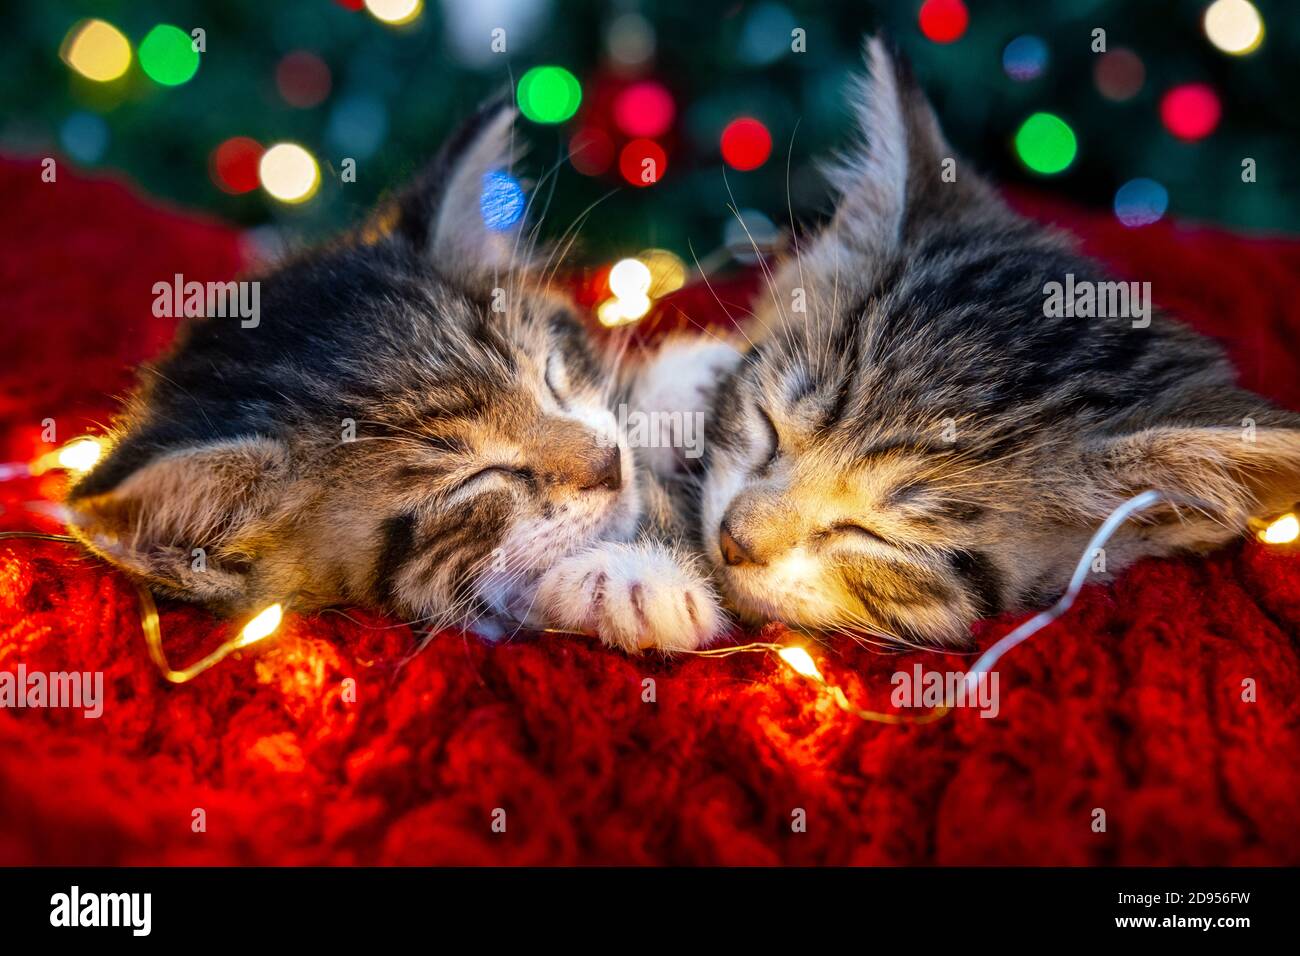 Christmas cats. Two cute little striped kittens sleeping on ...